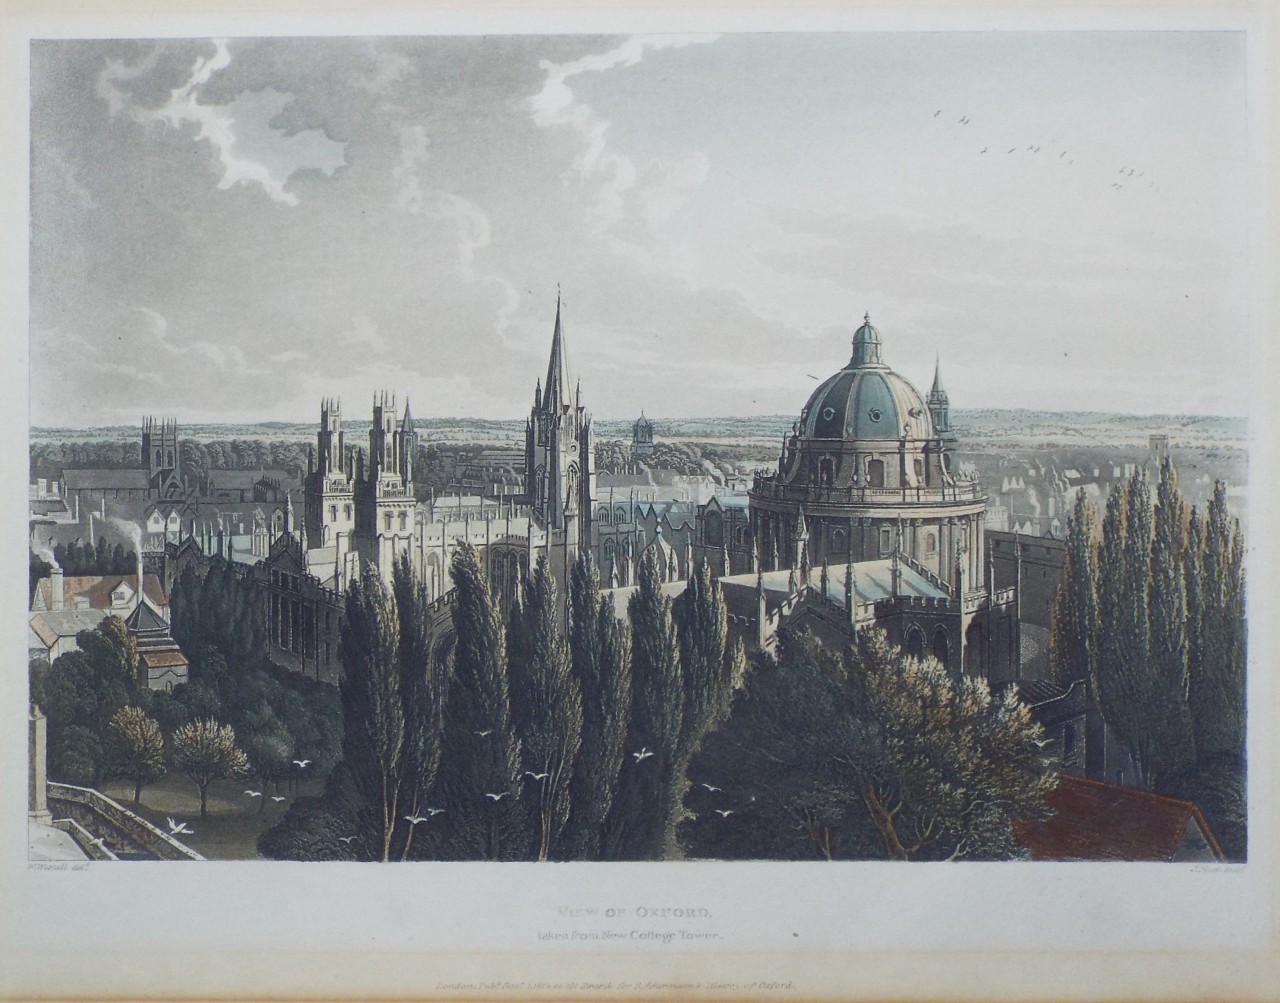 Aquatint - View of Oxford, taken from New College Tower.  - Bluck